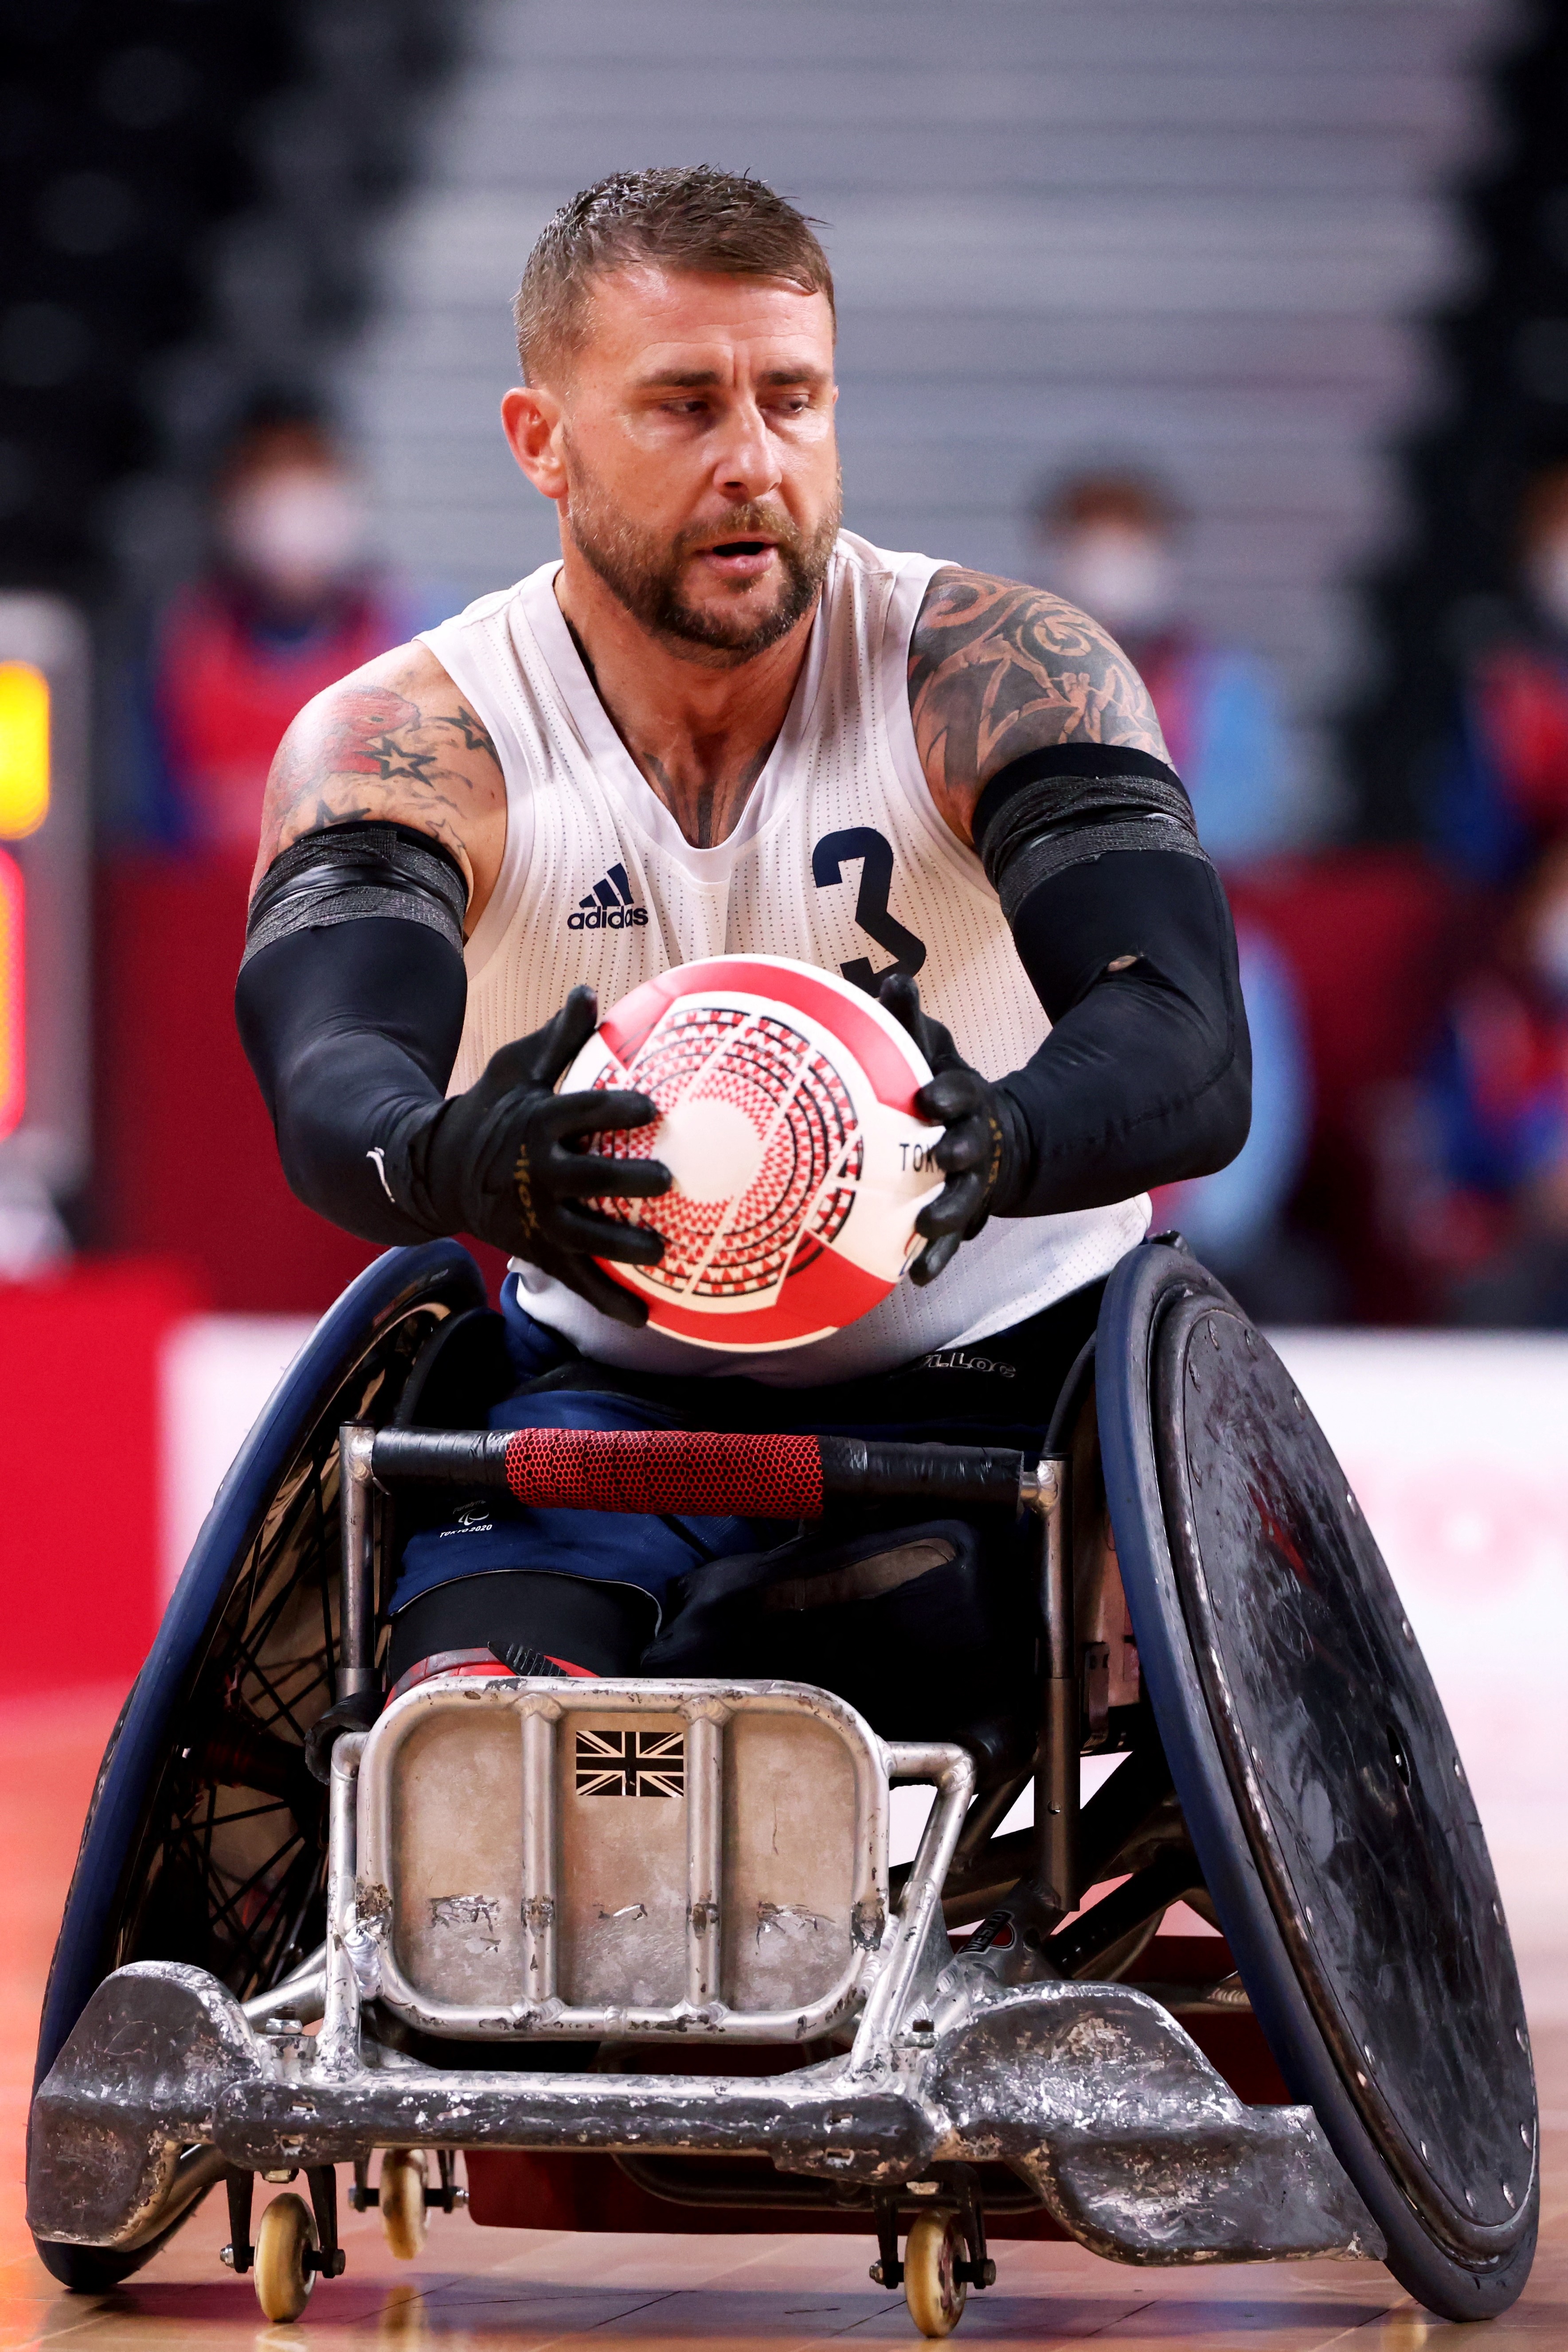 Stuart Robinson helped Team GB to gold in the Tokyo 2021 Paralympics and will hope to make it a double in Paris